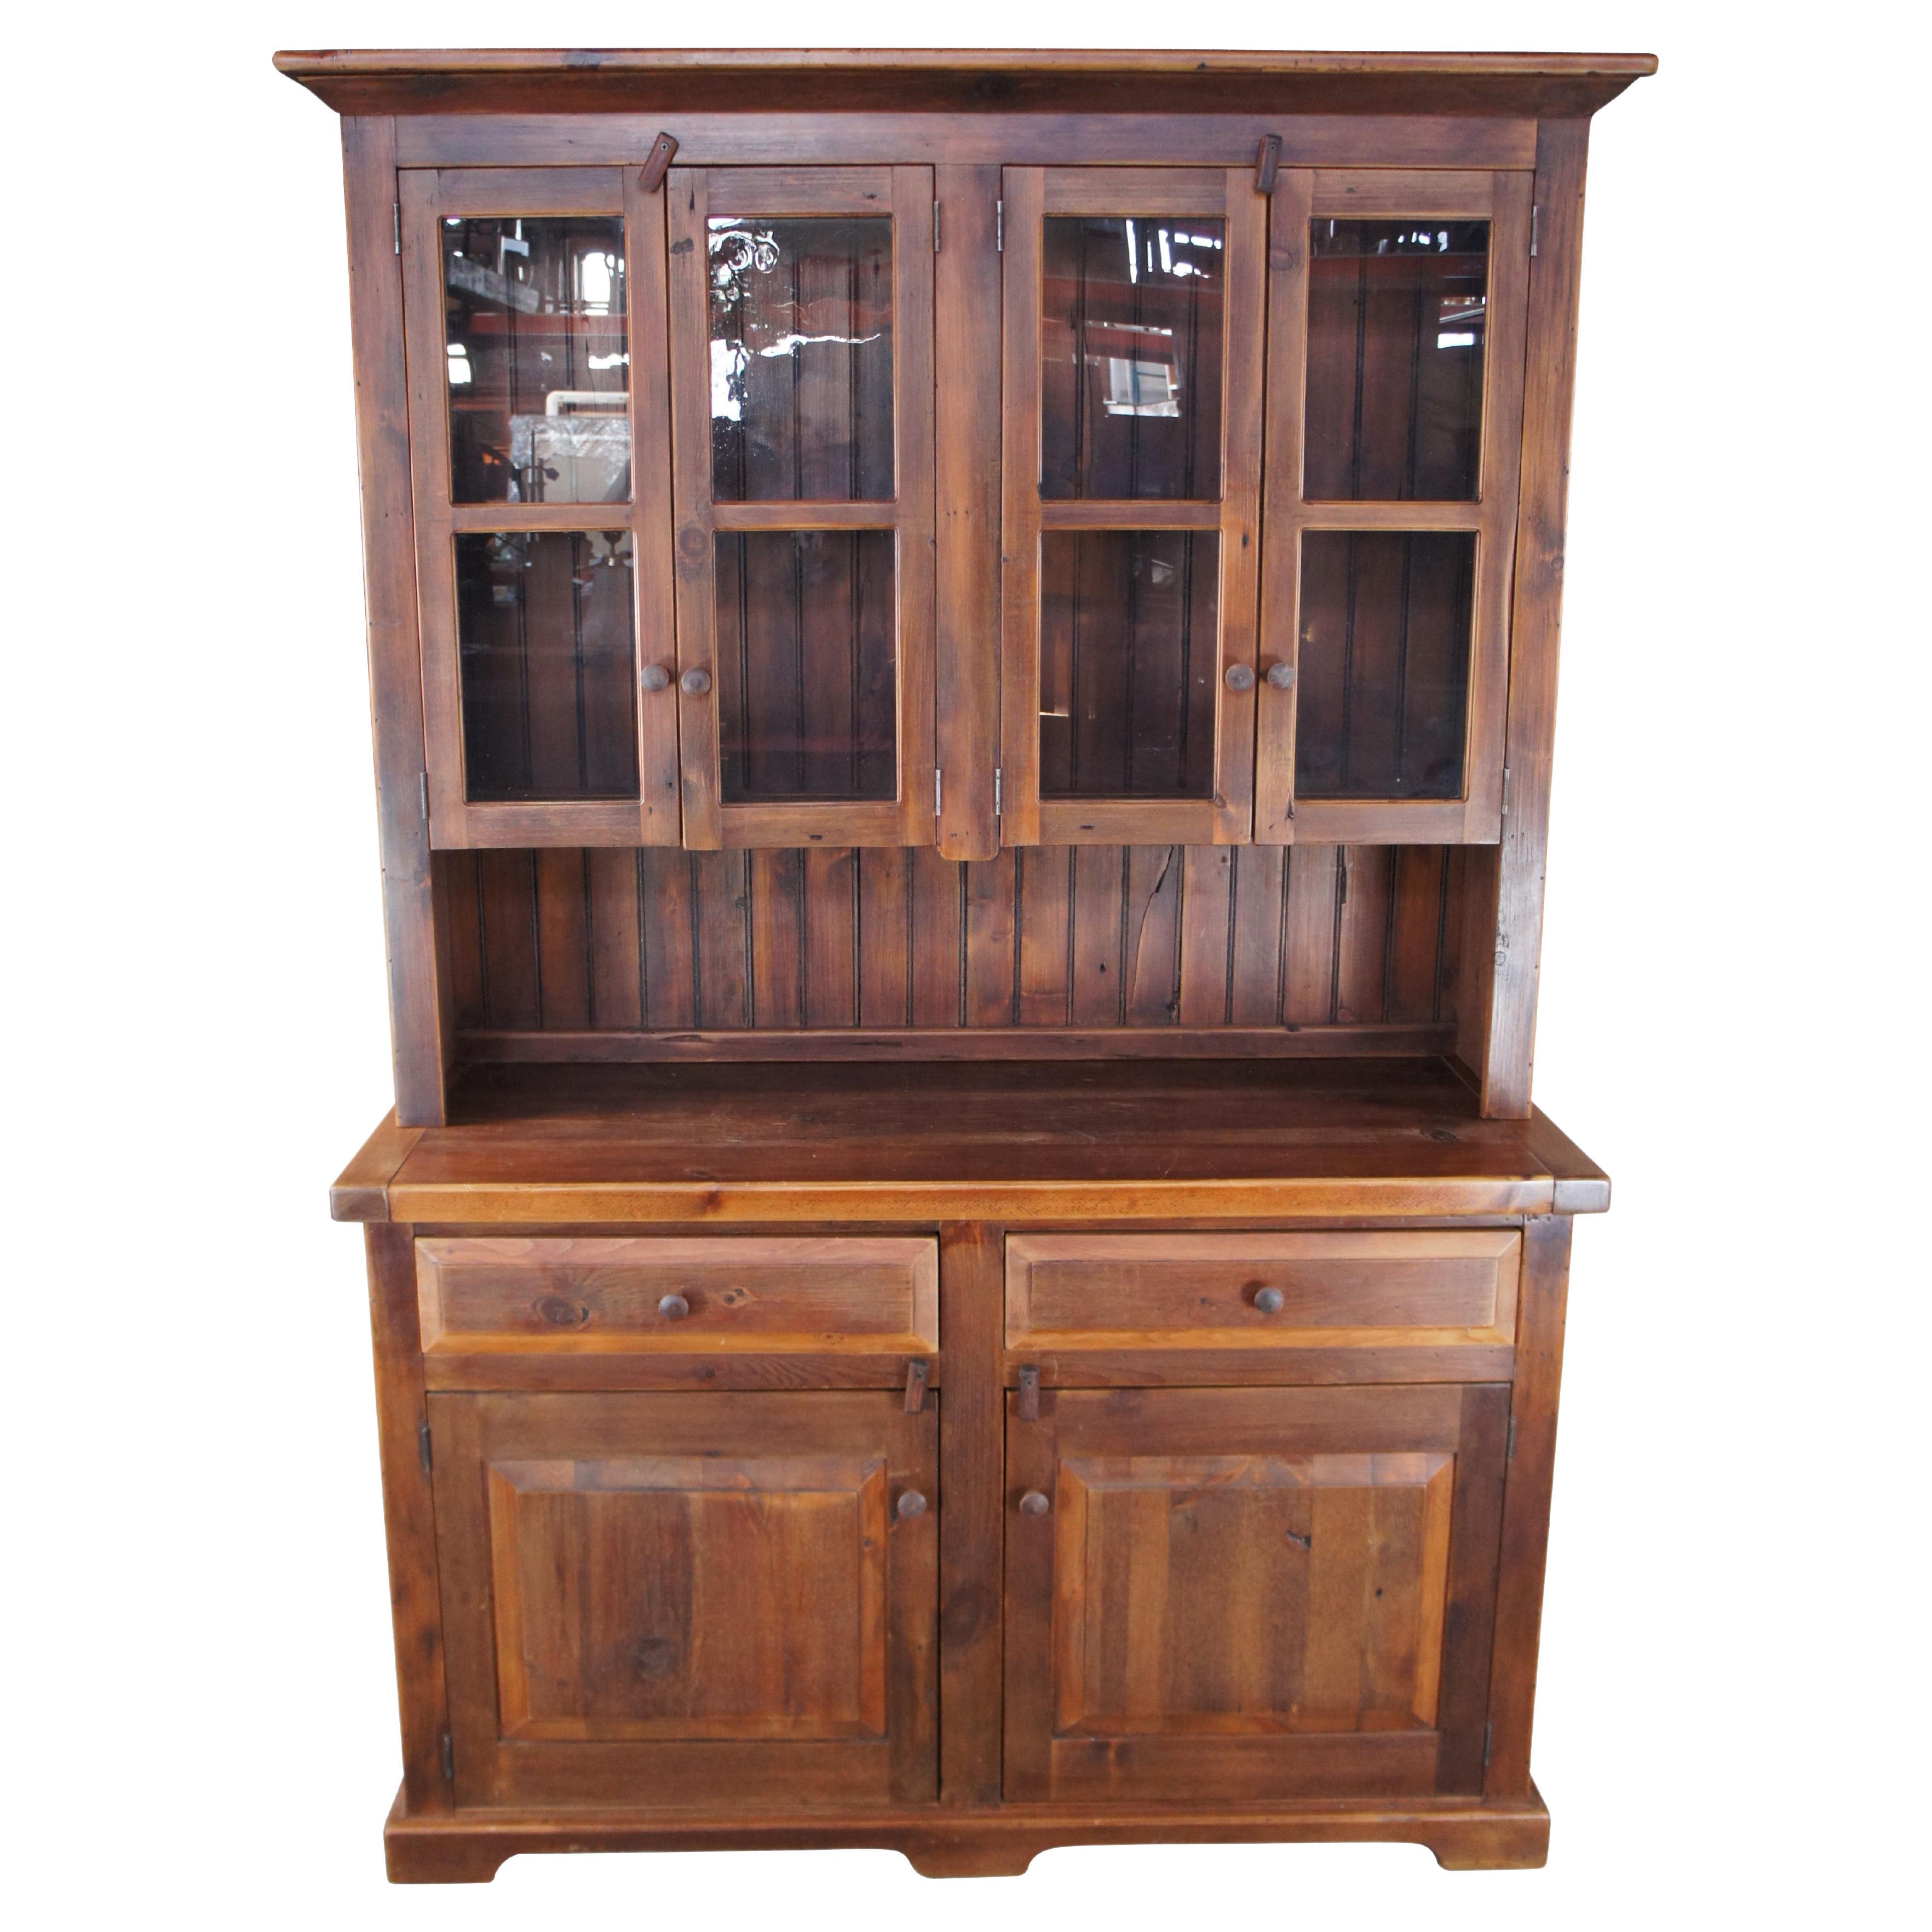 Vintage Pine Stepback Country Farmhouse Cupboard Hutch Display Cabinet 80"